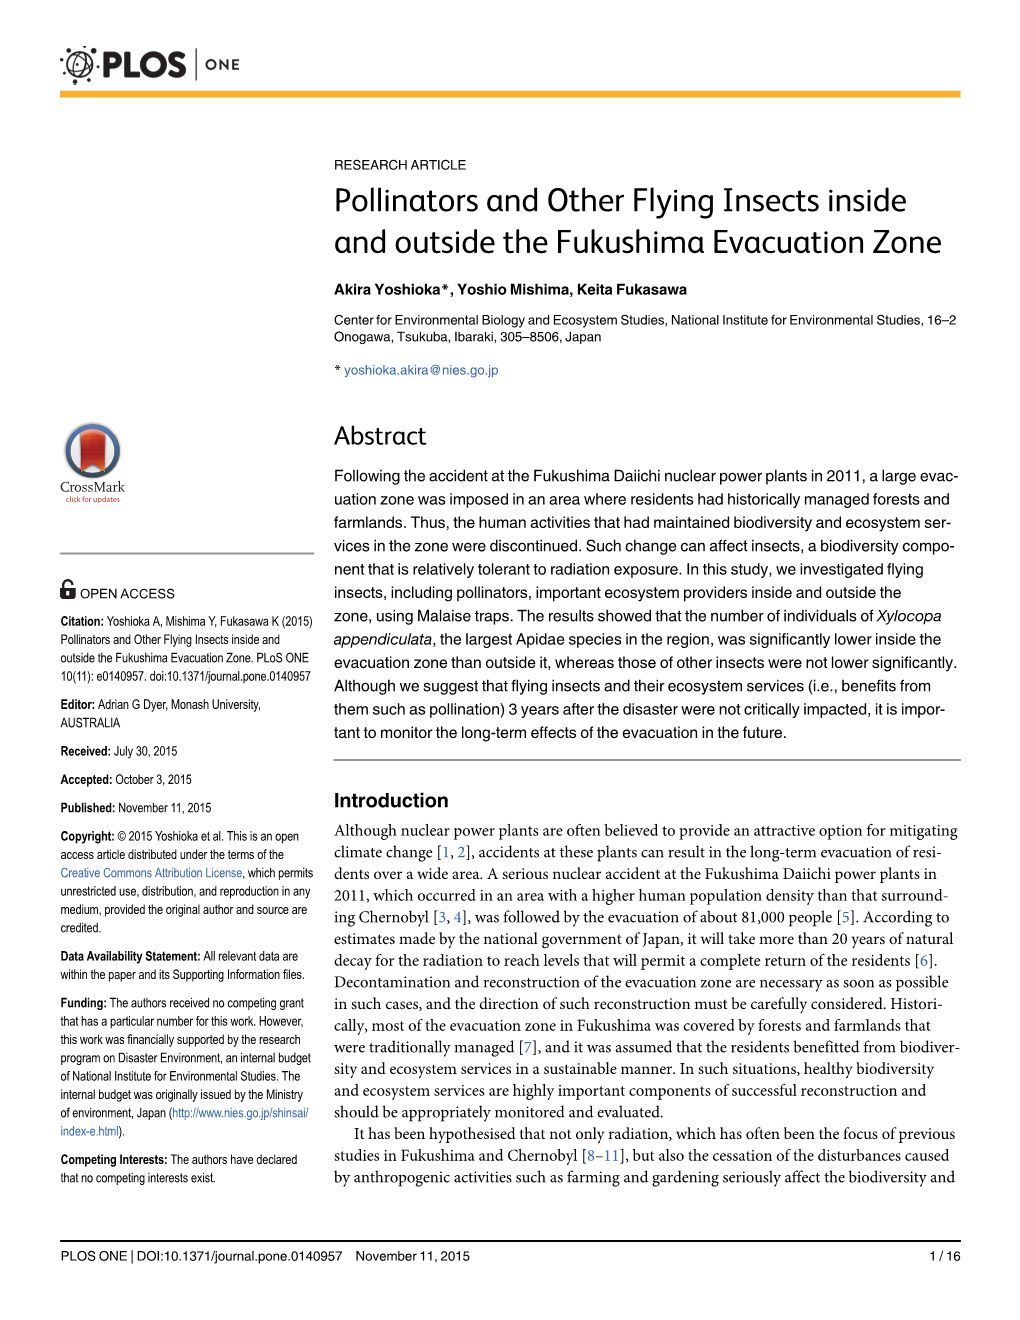 Pollinators and Other Flying Insects Inside and Outside the Fukushima Evacuation Zone